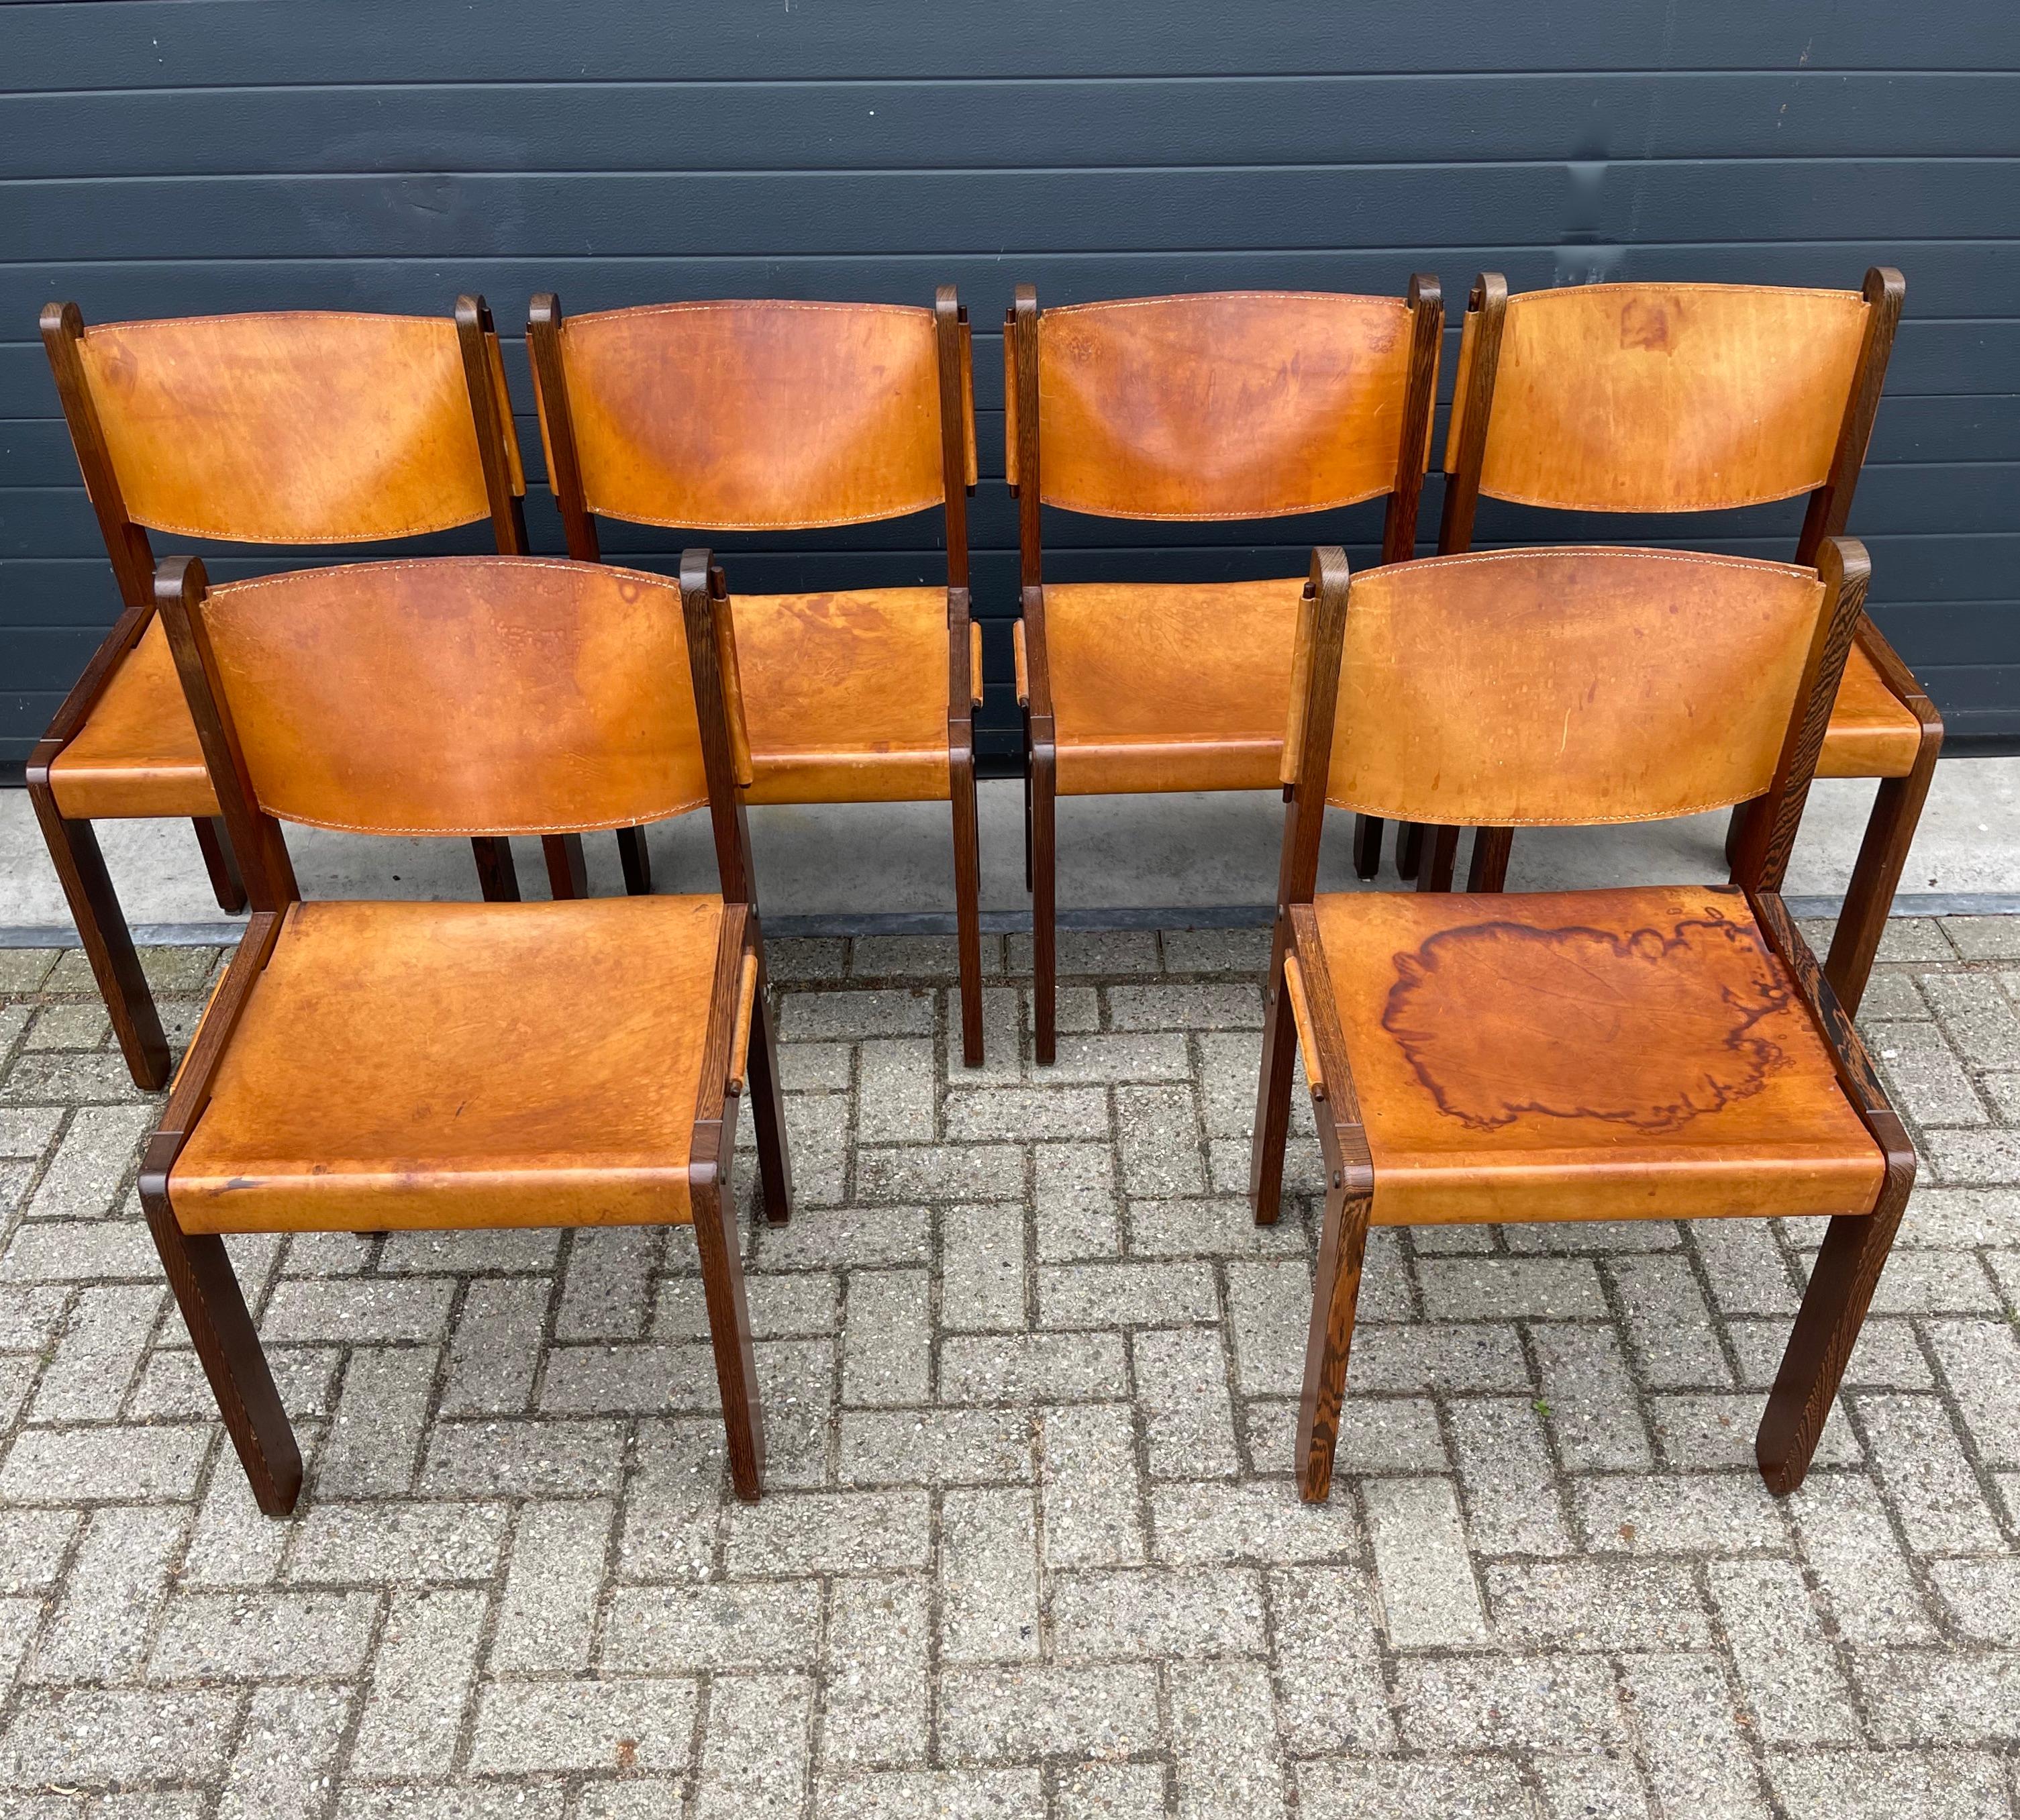 Dutch Stunning Midcentury Modern Wengé & Leather Dining Table Set with 6 Chairs, 1970s